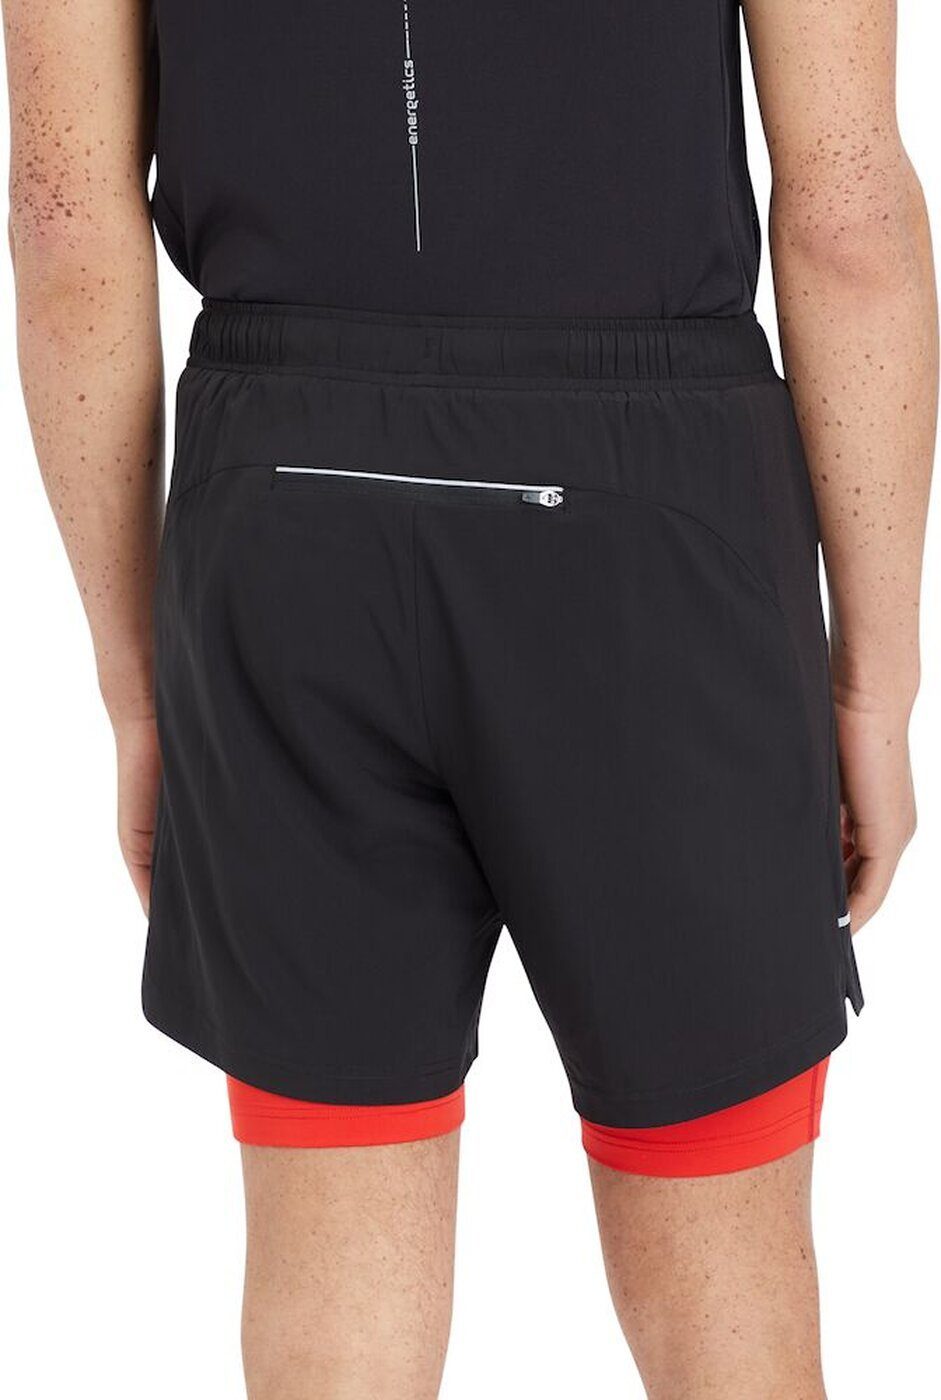 BLACK/RED 2-in-1-Shorts ux He.-Shorts Energetics Allen IV